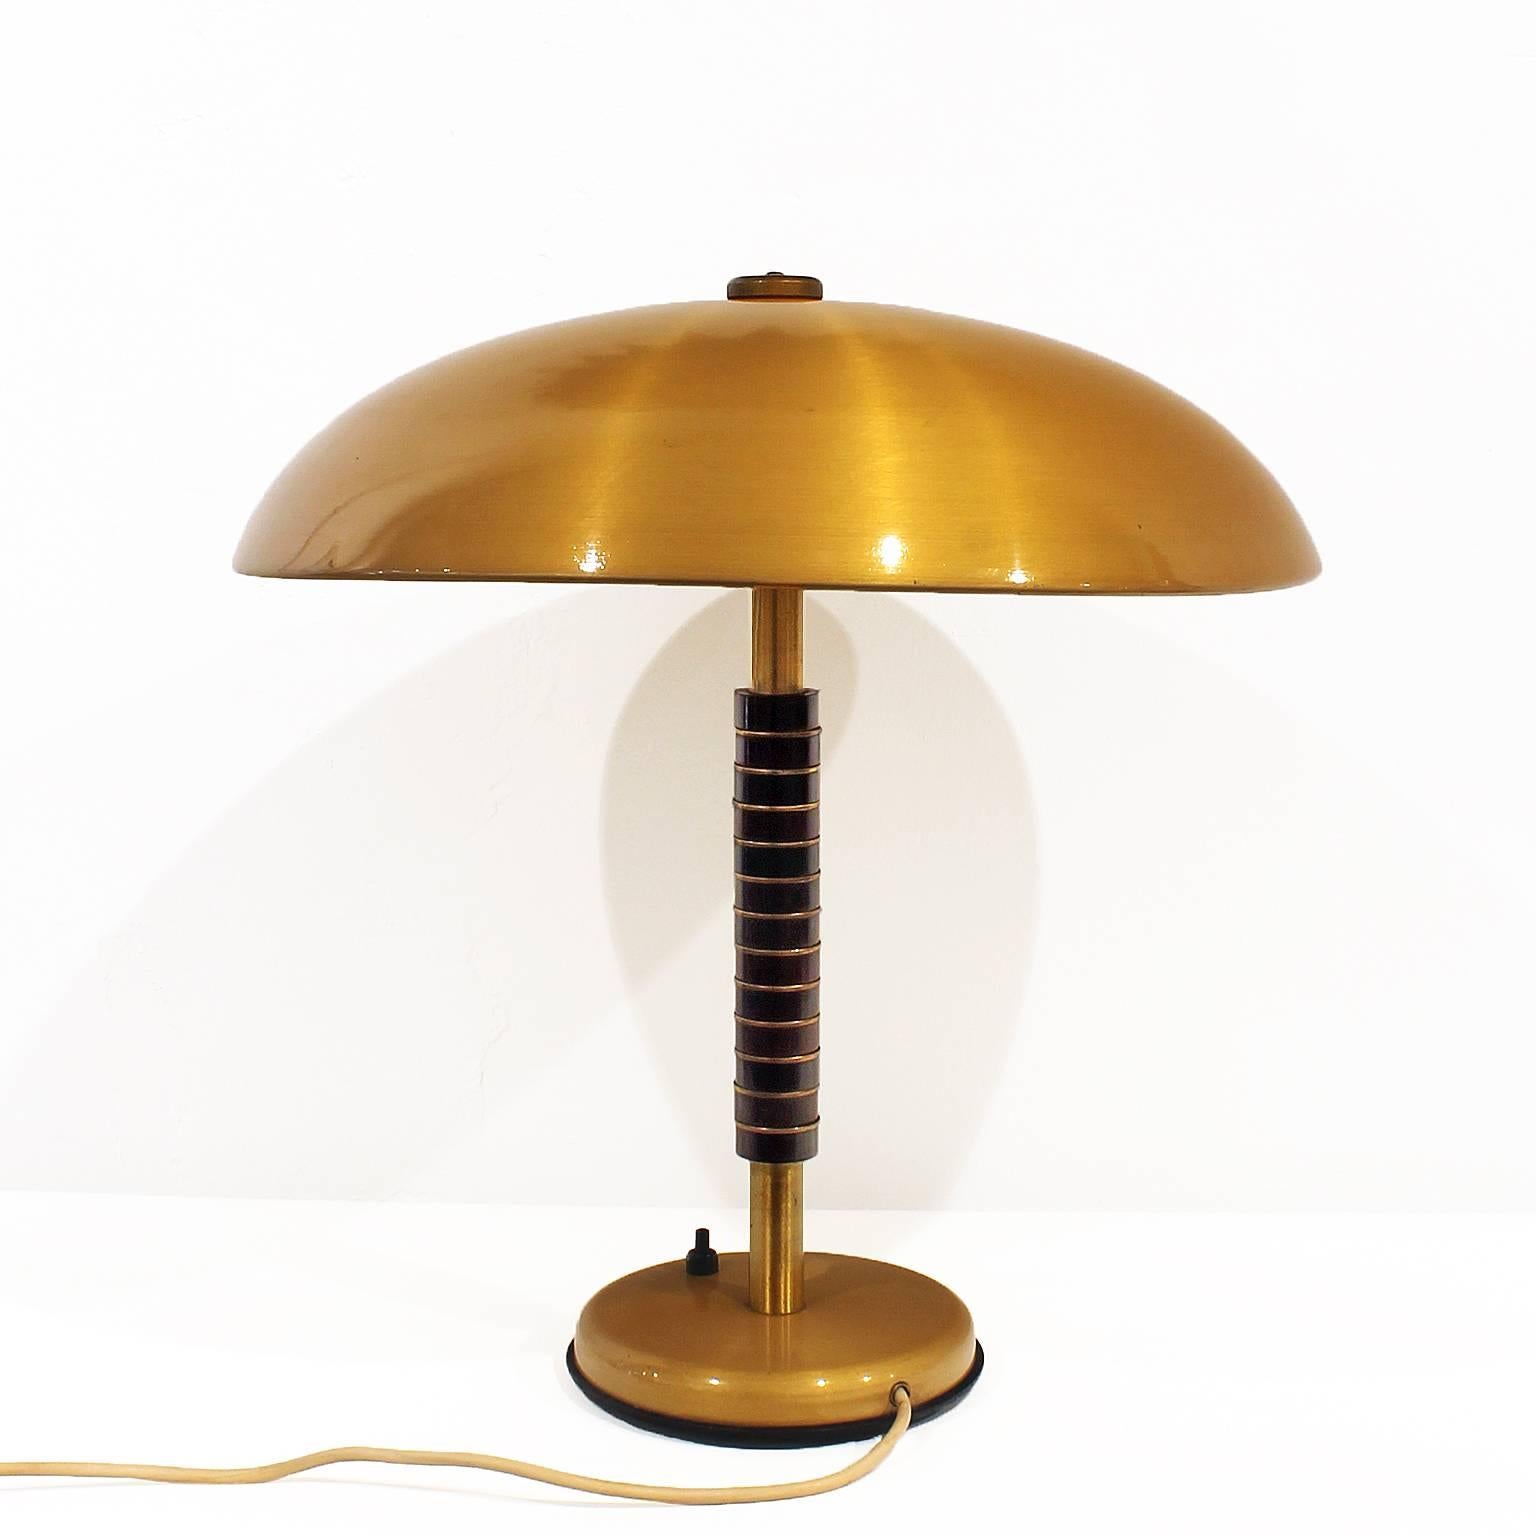 Desk lamp, stand with wood pieces alternated with polished brass rings, brass lampshade.

Belgium, circa 1950.